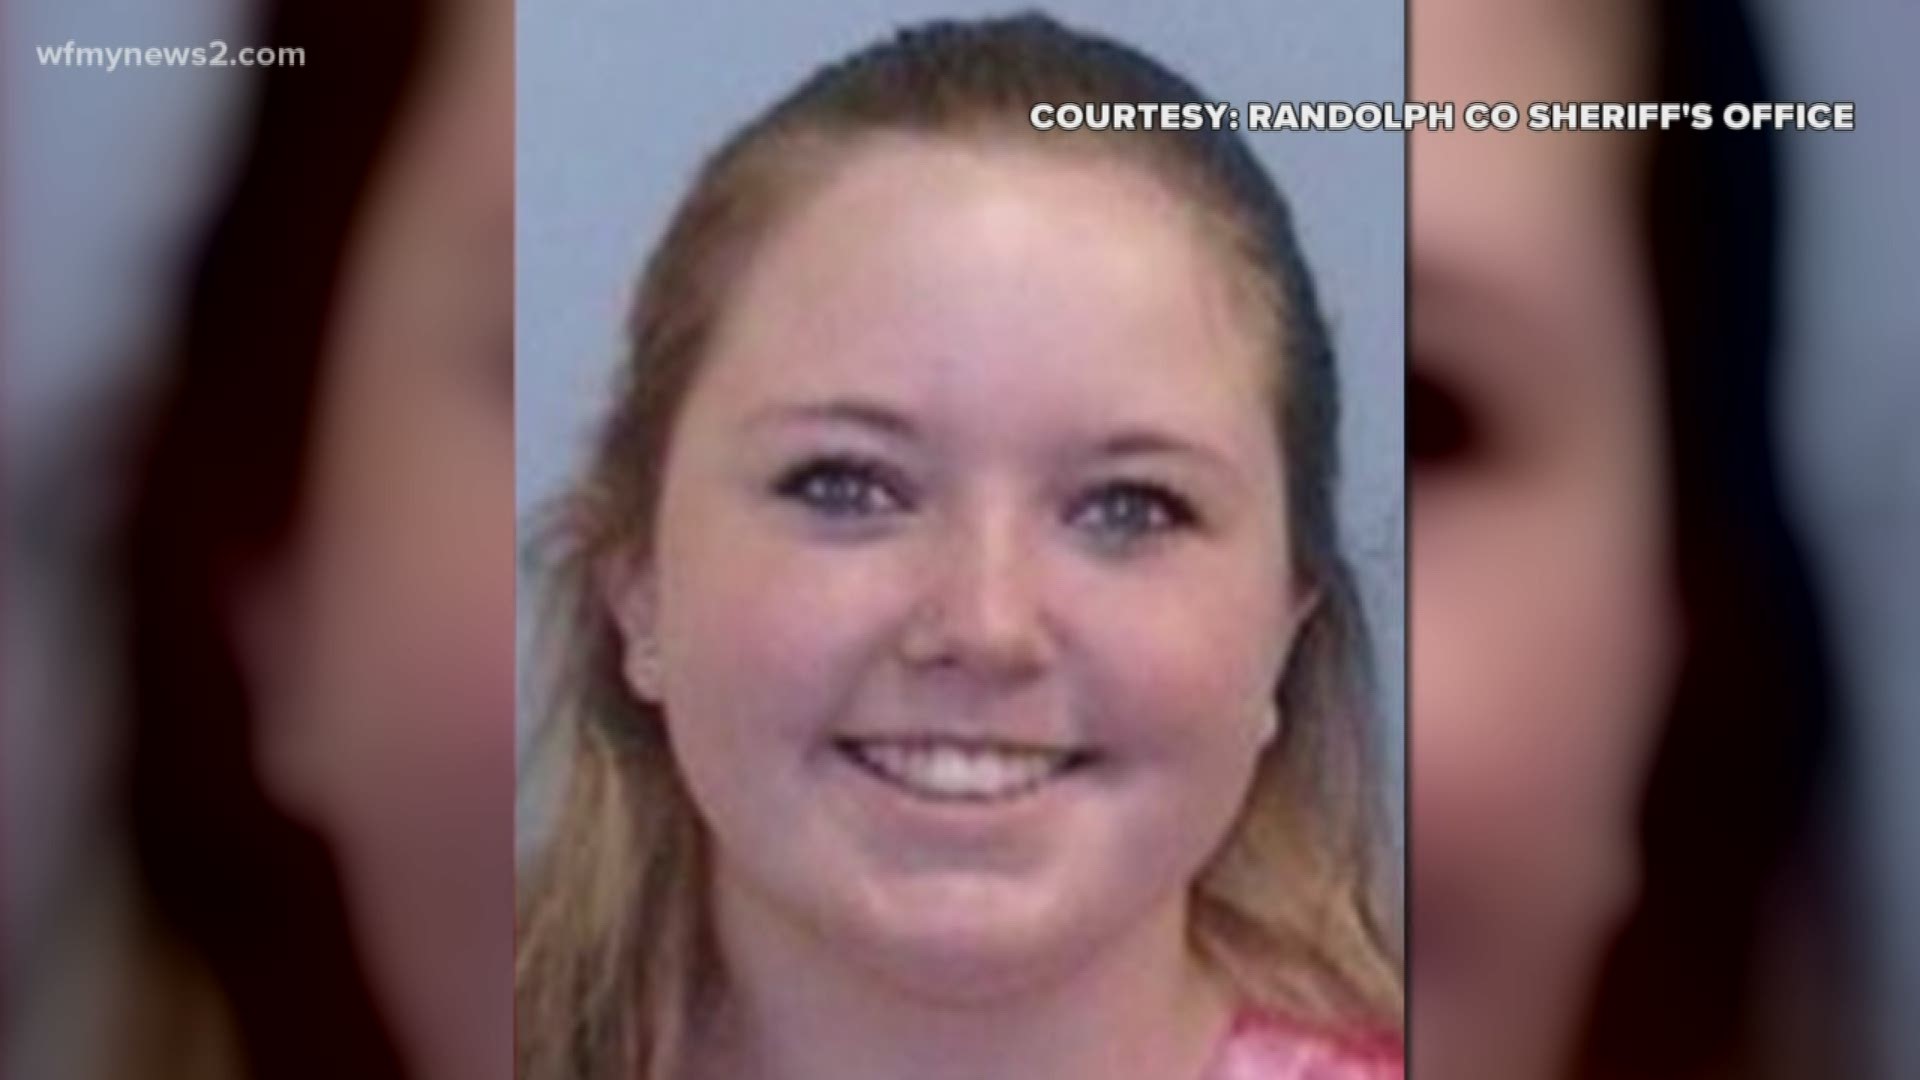 Investigators say a 21-year-old High Point woman faked having kidney cancer so she could receive charity money from a local group.